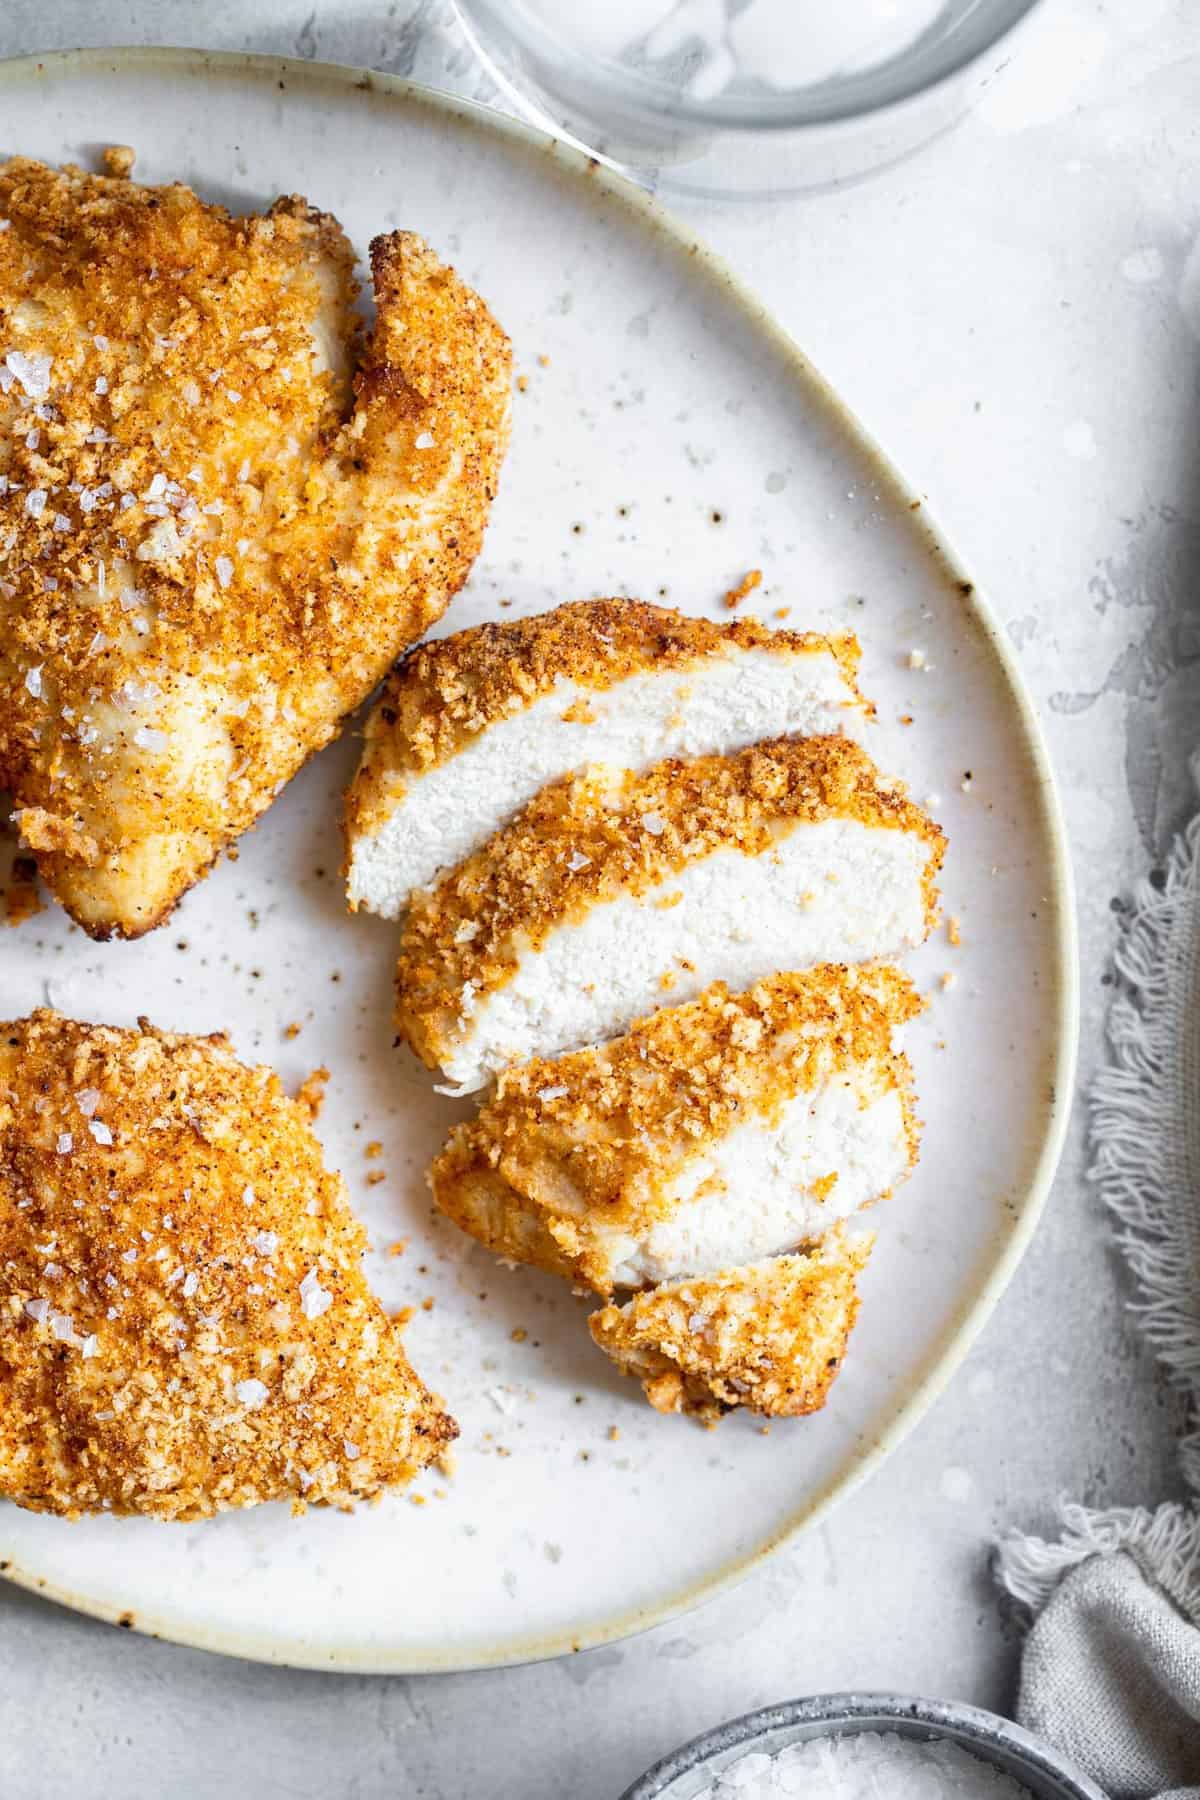 cooked Crispy Air Fryer Chicken Breast sliced on a round white plate - one of the recipes for this week's healthy weekly meal plan